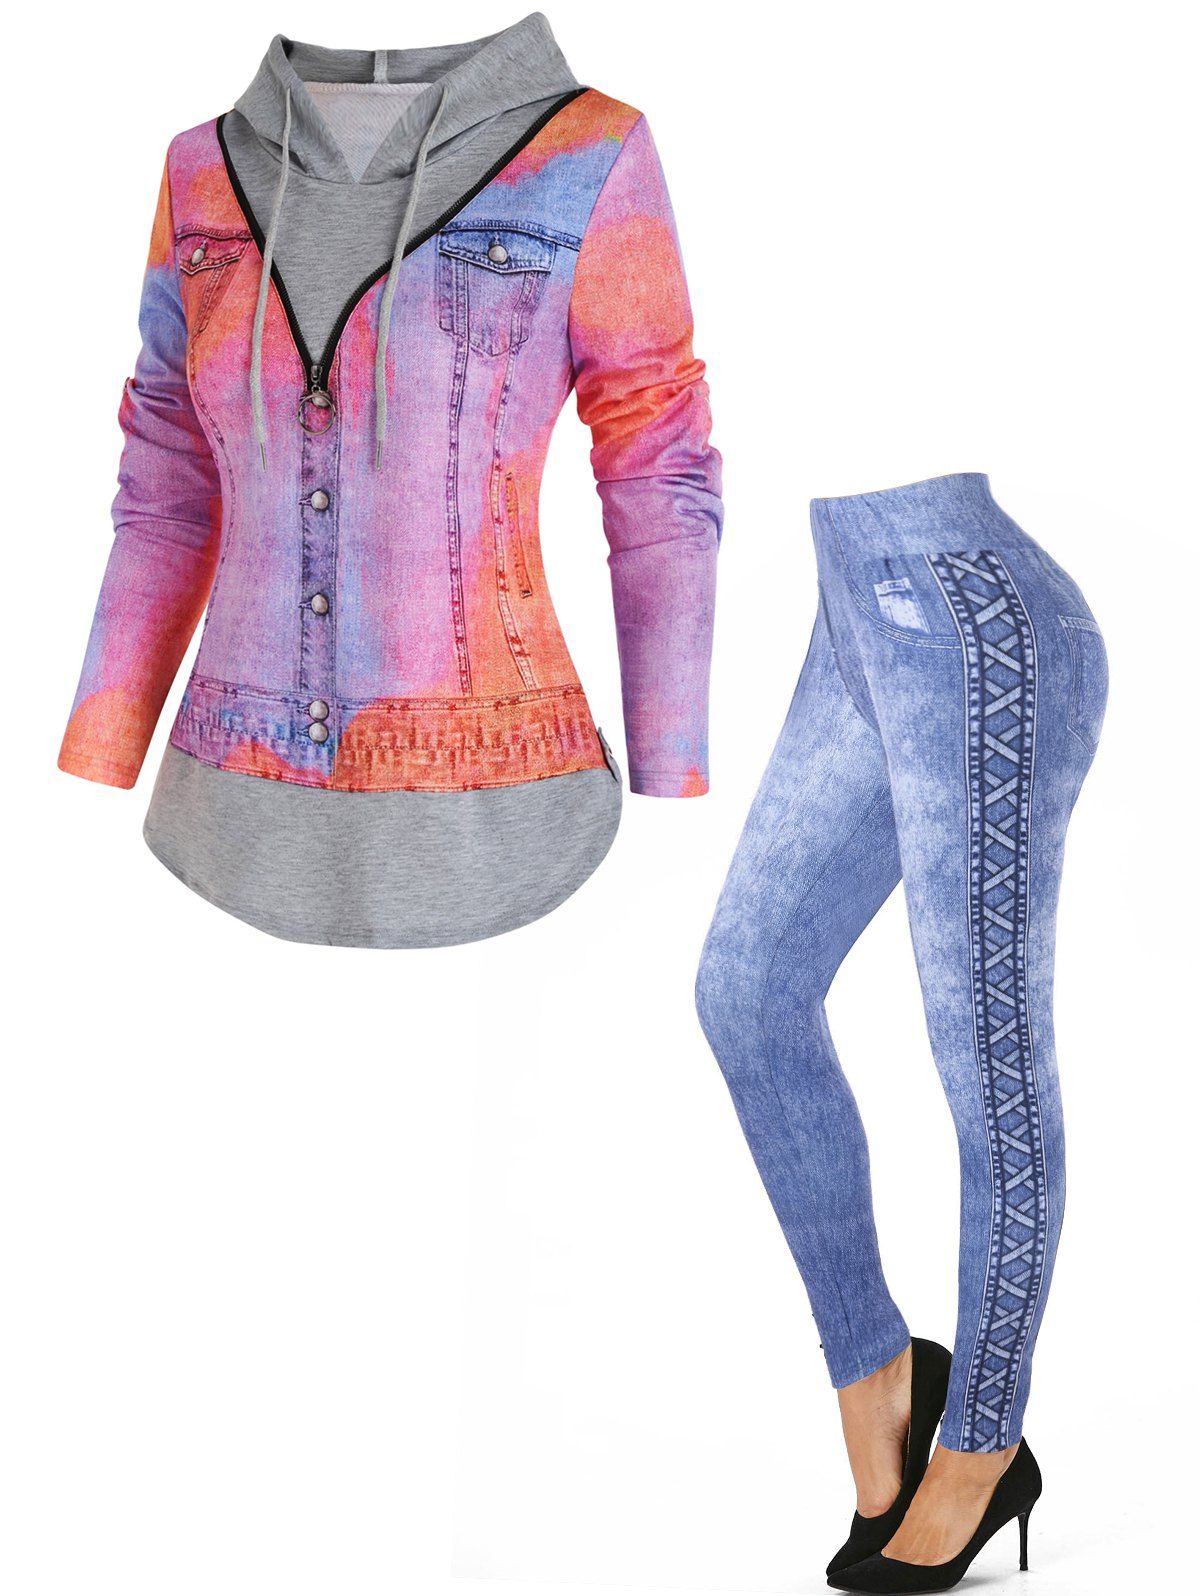 Denim Jacket 3D Print O Ring Zip Faux Twinset Hooded T Shirt And Skinny Leggings Casual Outfit - multicolor S